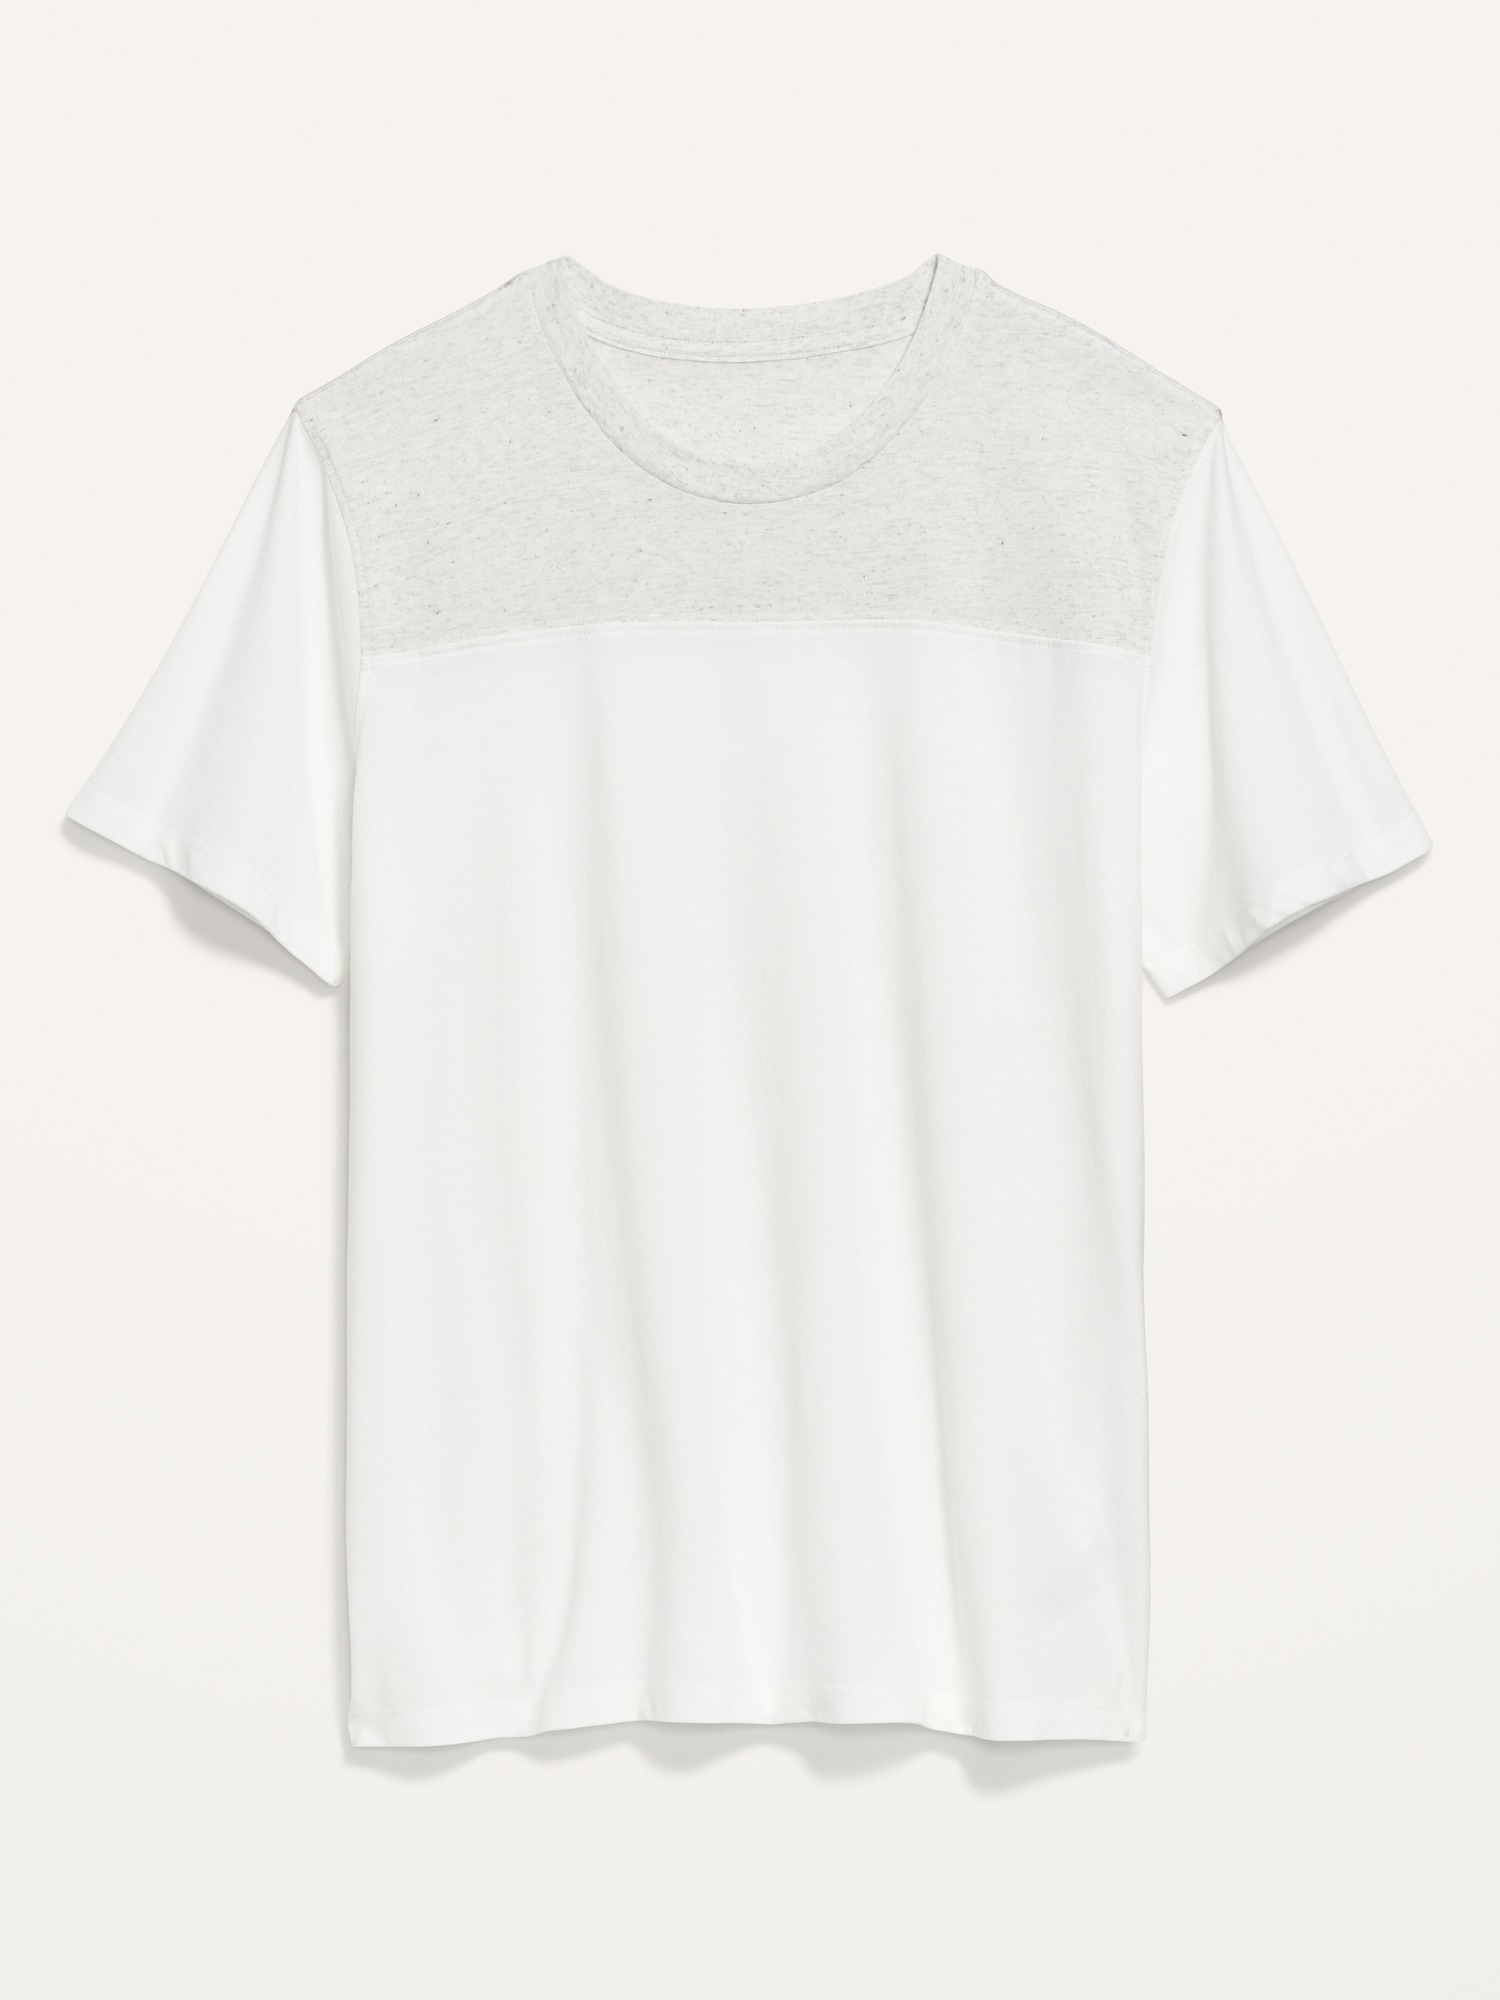 Old Navy Soft-Washed Color-Block Football T-Shirt for Men white. 1